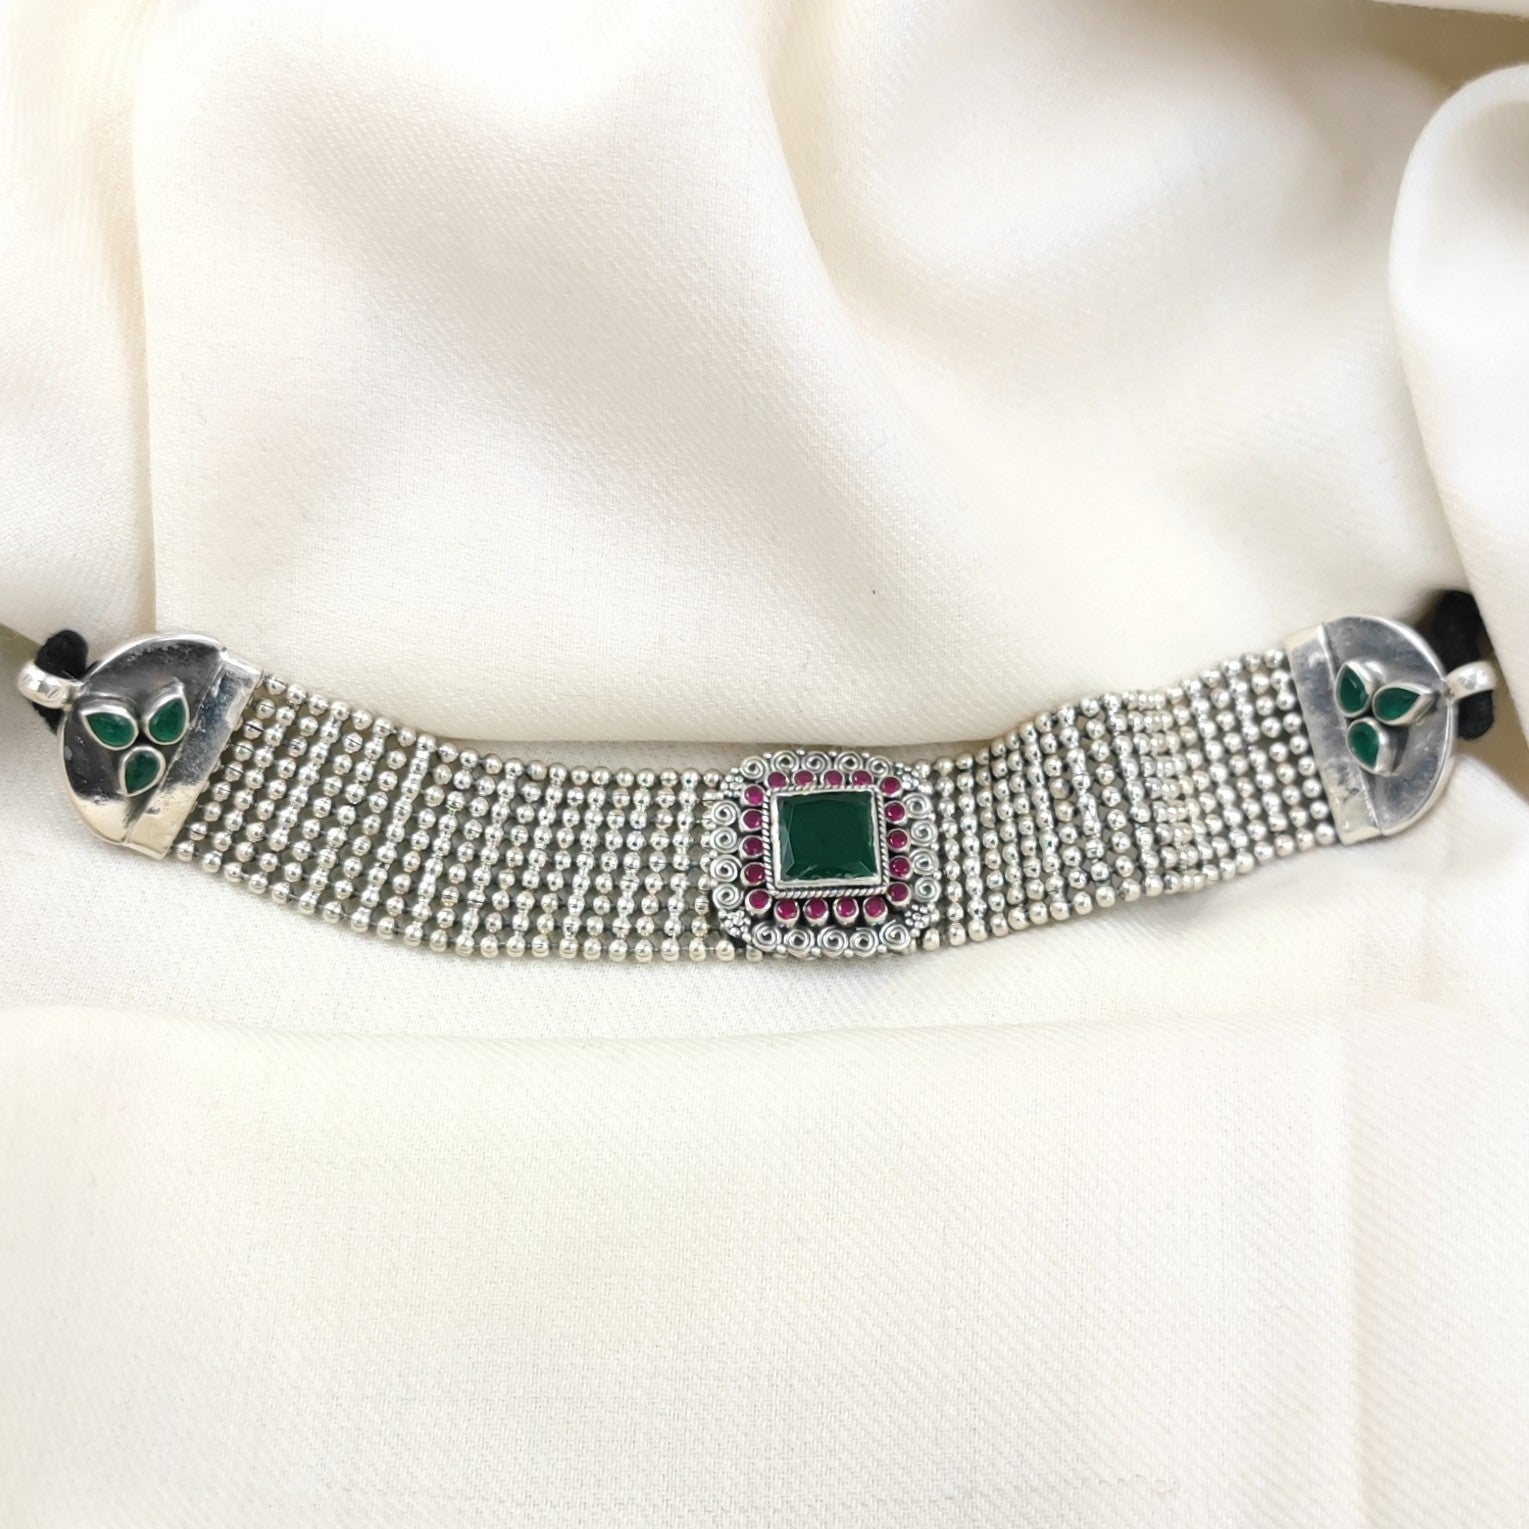 Silver Jewelry Necklace by Jauhri 92.5 Silver - Green Collar Choker